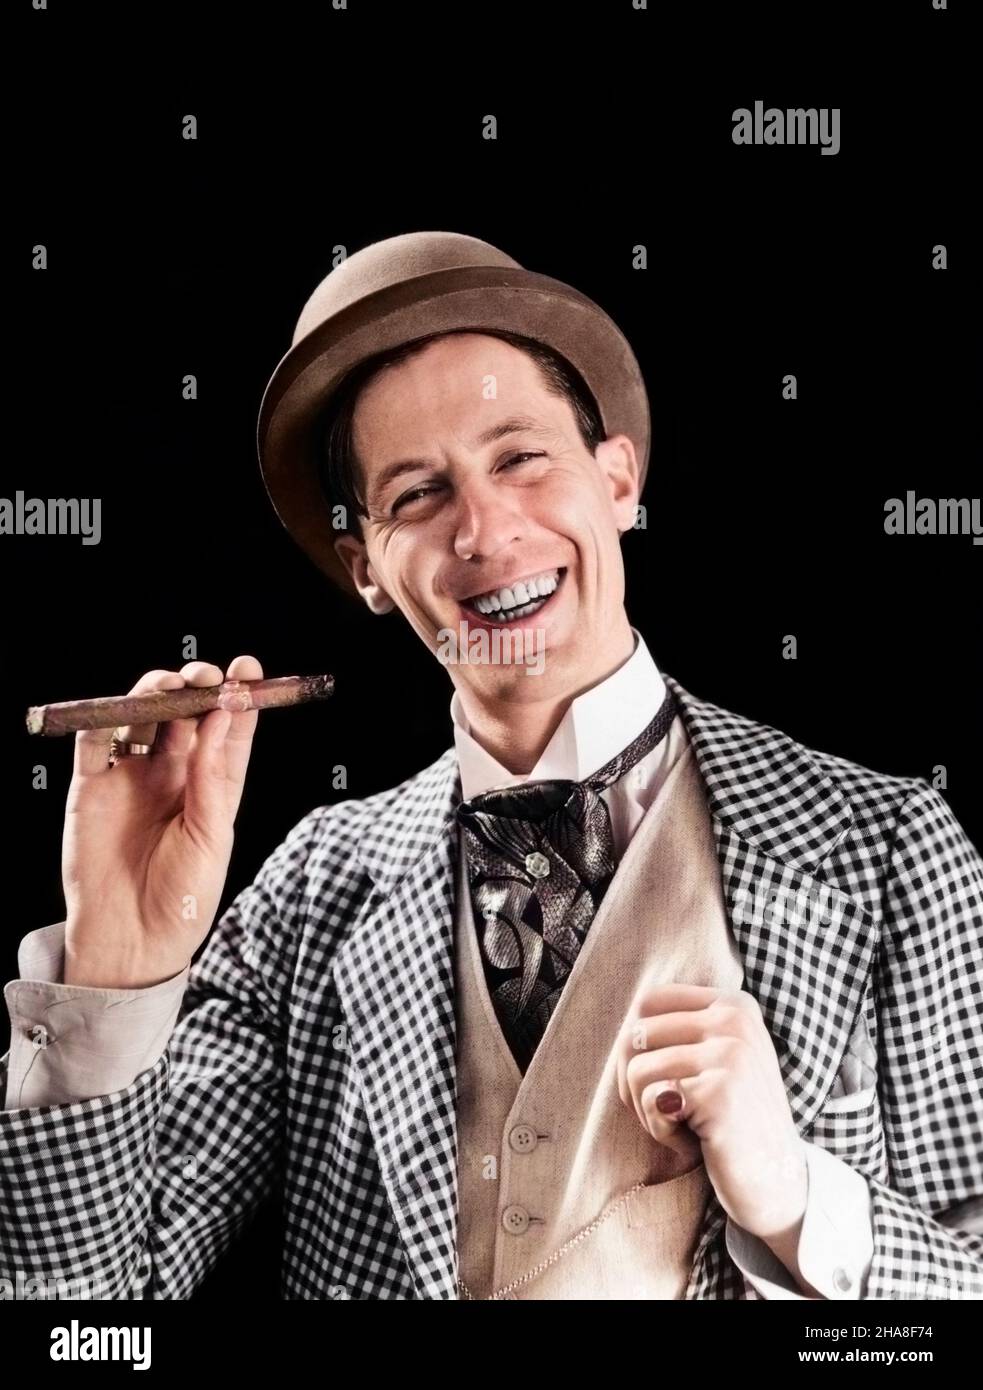 1910s 1920s PORTRAIT SMILING CHARACTER CON MAN BOWLER HAT FANCY SUIT CRAVAT SMOKING CIGAR LOOKING AT CAMERA - s5306c HAR001 HARS VEST EYE CONTACT HAPPINESS SHADY OPERATOR CHEERFUL CHEAT CRAVAT CON CON MAN SCOUNDREL SHYSTER BOWLER HAT CONFIDENCE GAME OCCUPATIONS SHARP SMILES SWINDLER CROOK JOYFUL STYLISH DANDY CHECKERED JACKET DERBY HAT INHALING MID-ADULT MID-ADULT MAN UNTRUSTWORTHY CAUCASIAN ETHNICITY DEVIOUS HAR001 OLD FASHIONED Stock Photo